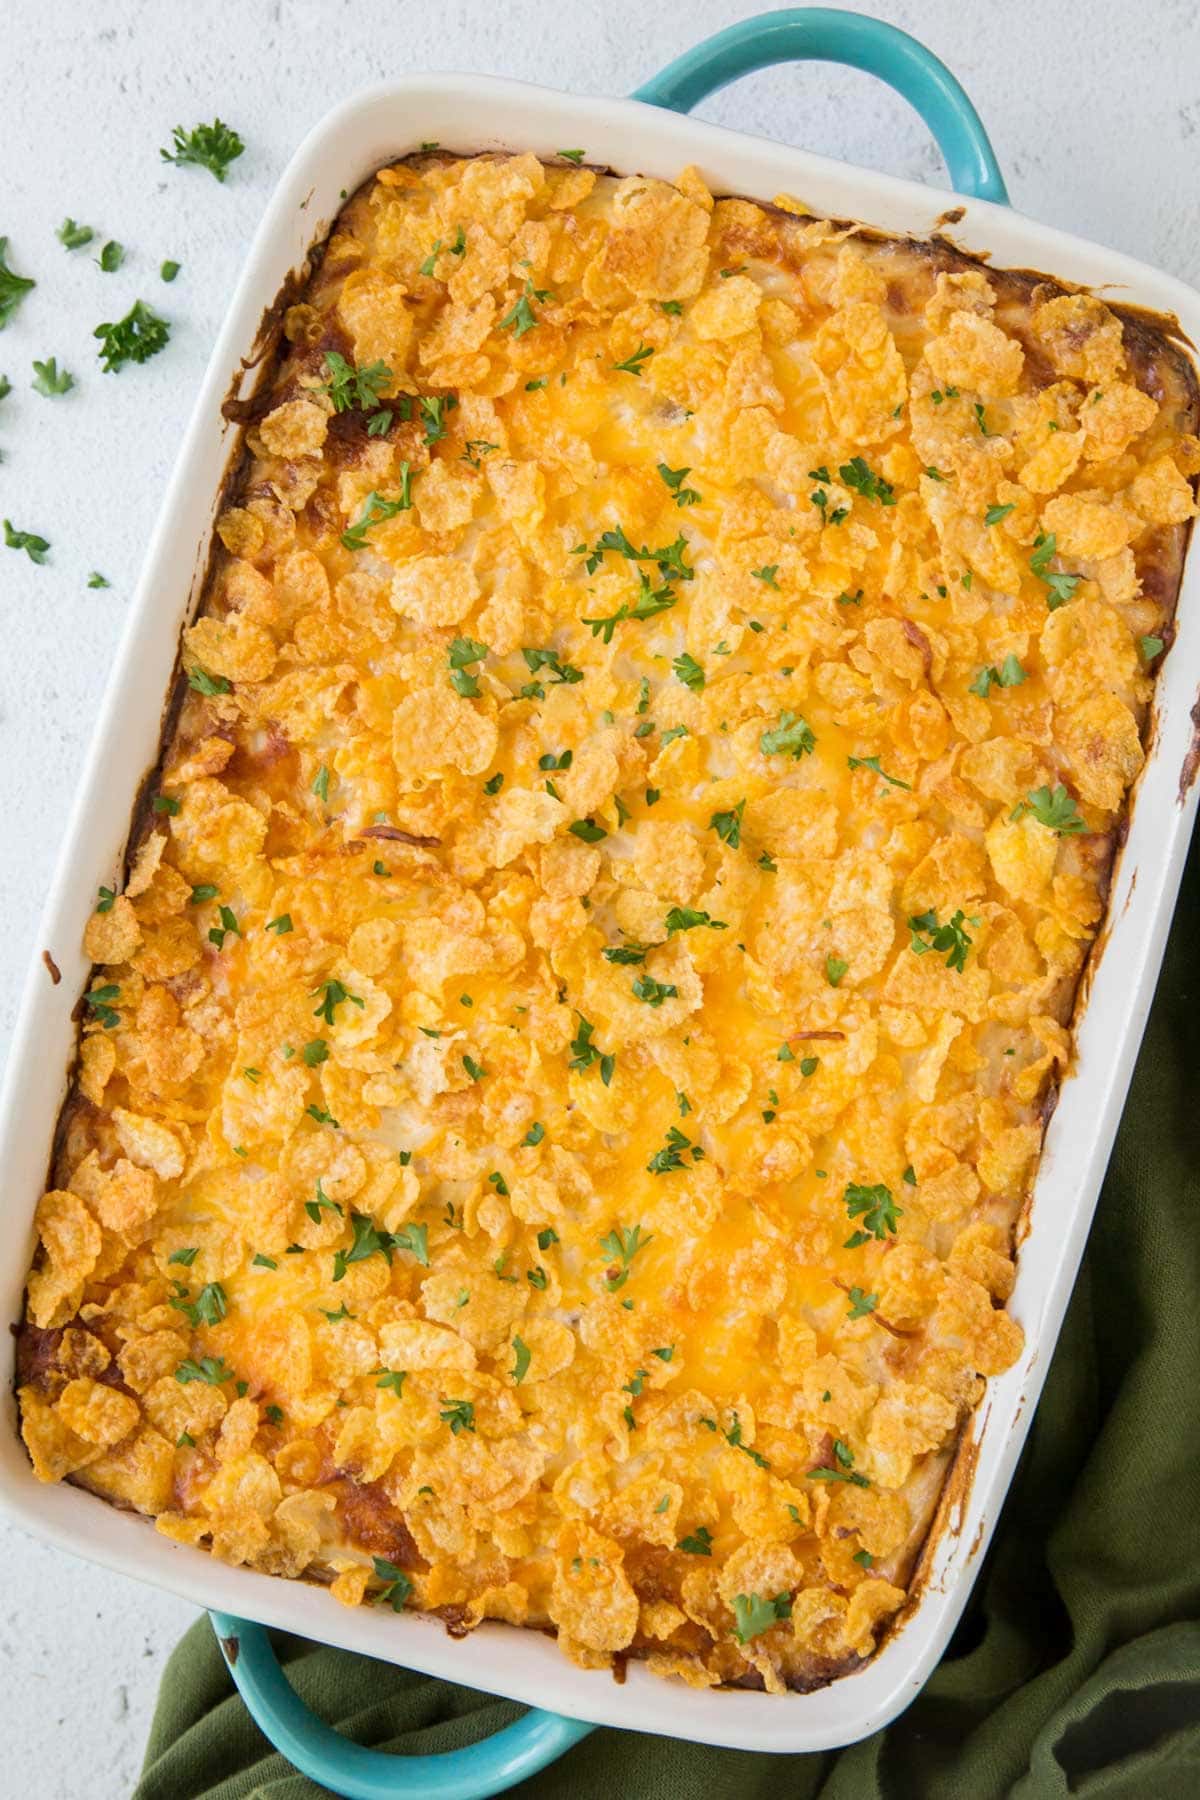 large casserole dish with cornflakes topping over cheesy potatoes, parsley